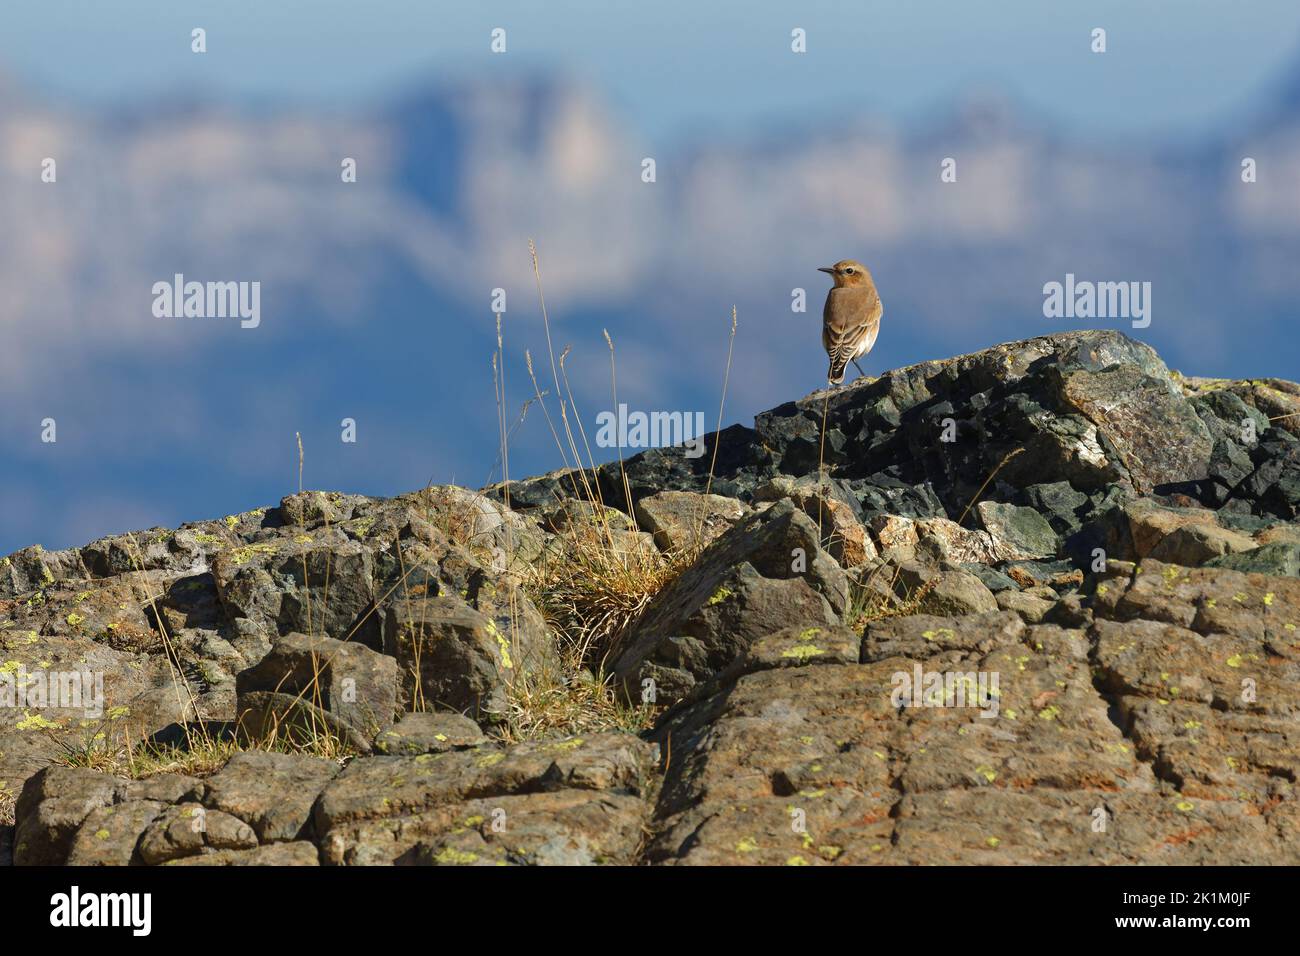 Northern wheatear on a cliff, with Chartreuse mountain range in background Stock Photo